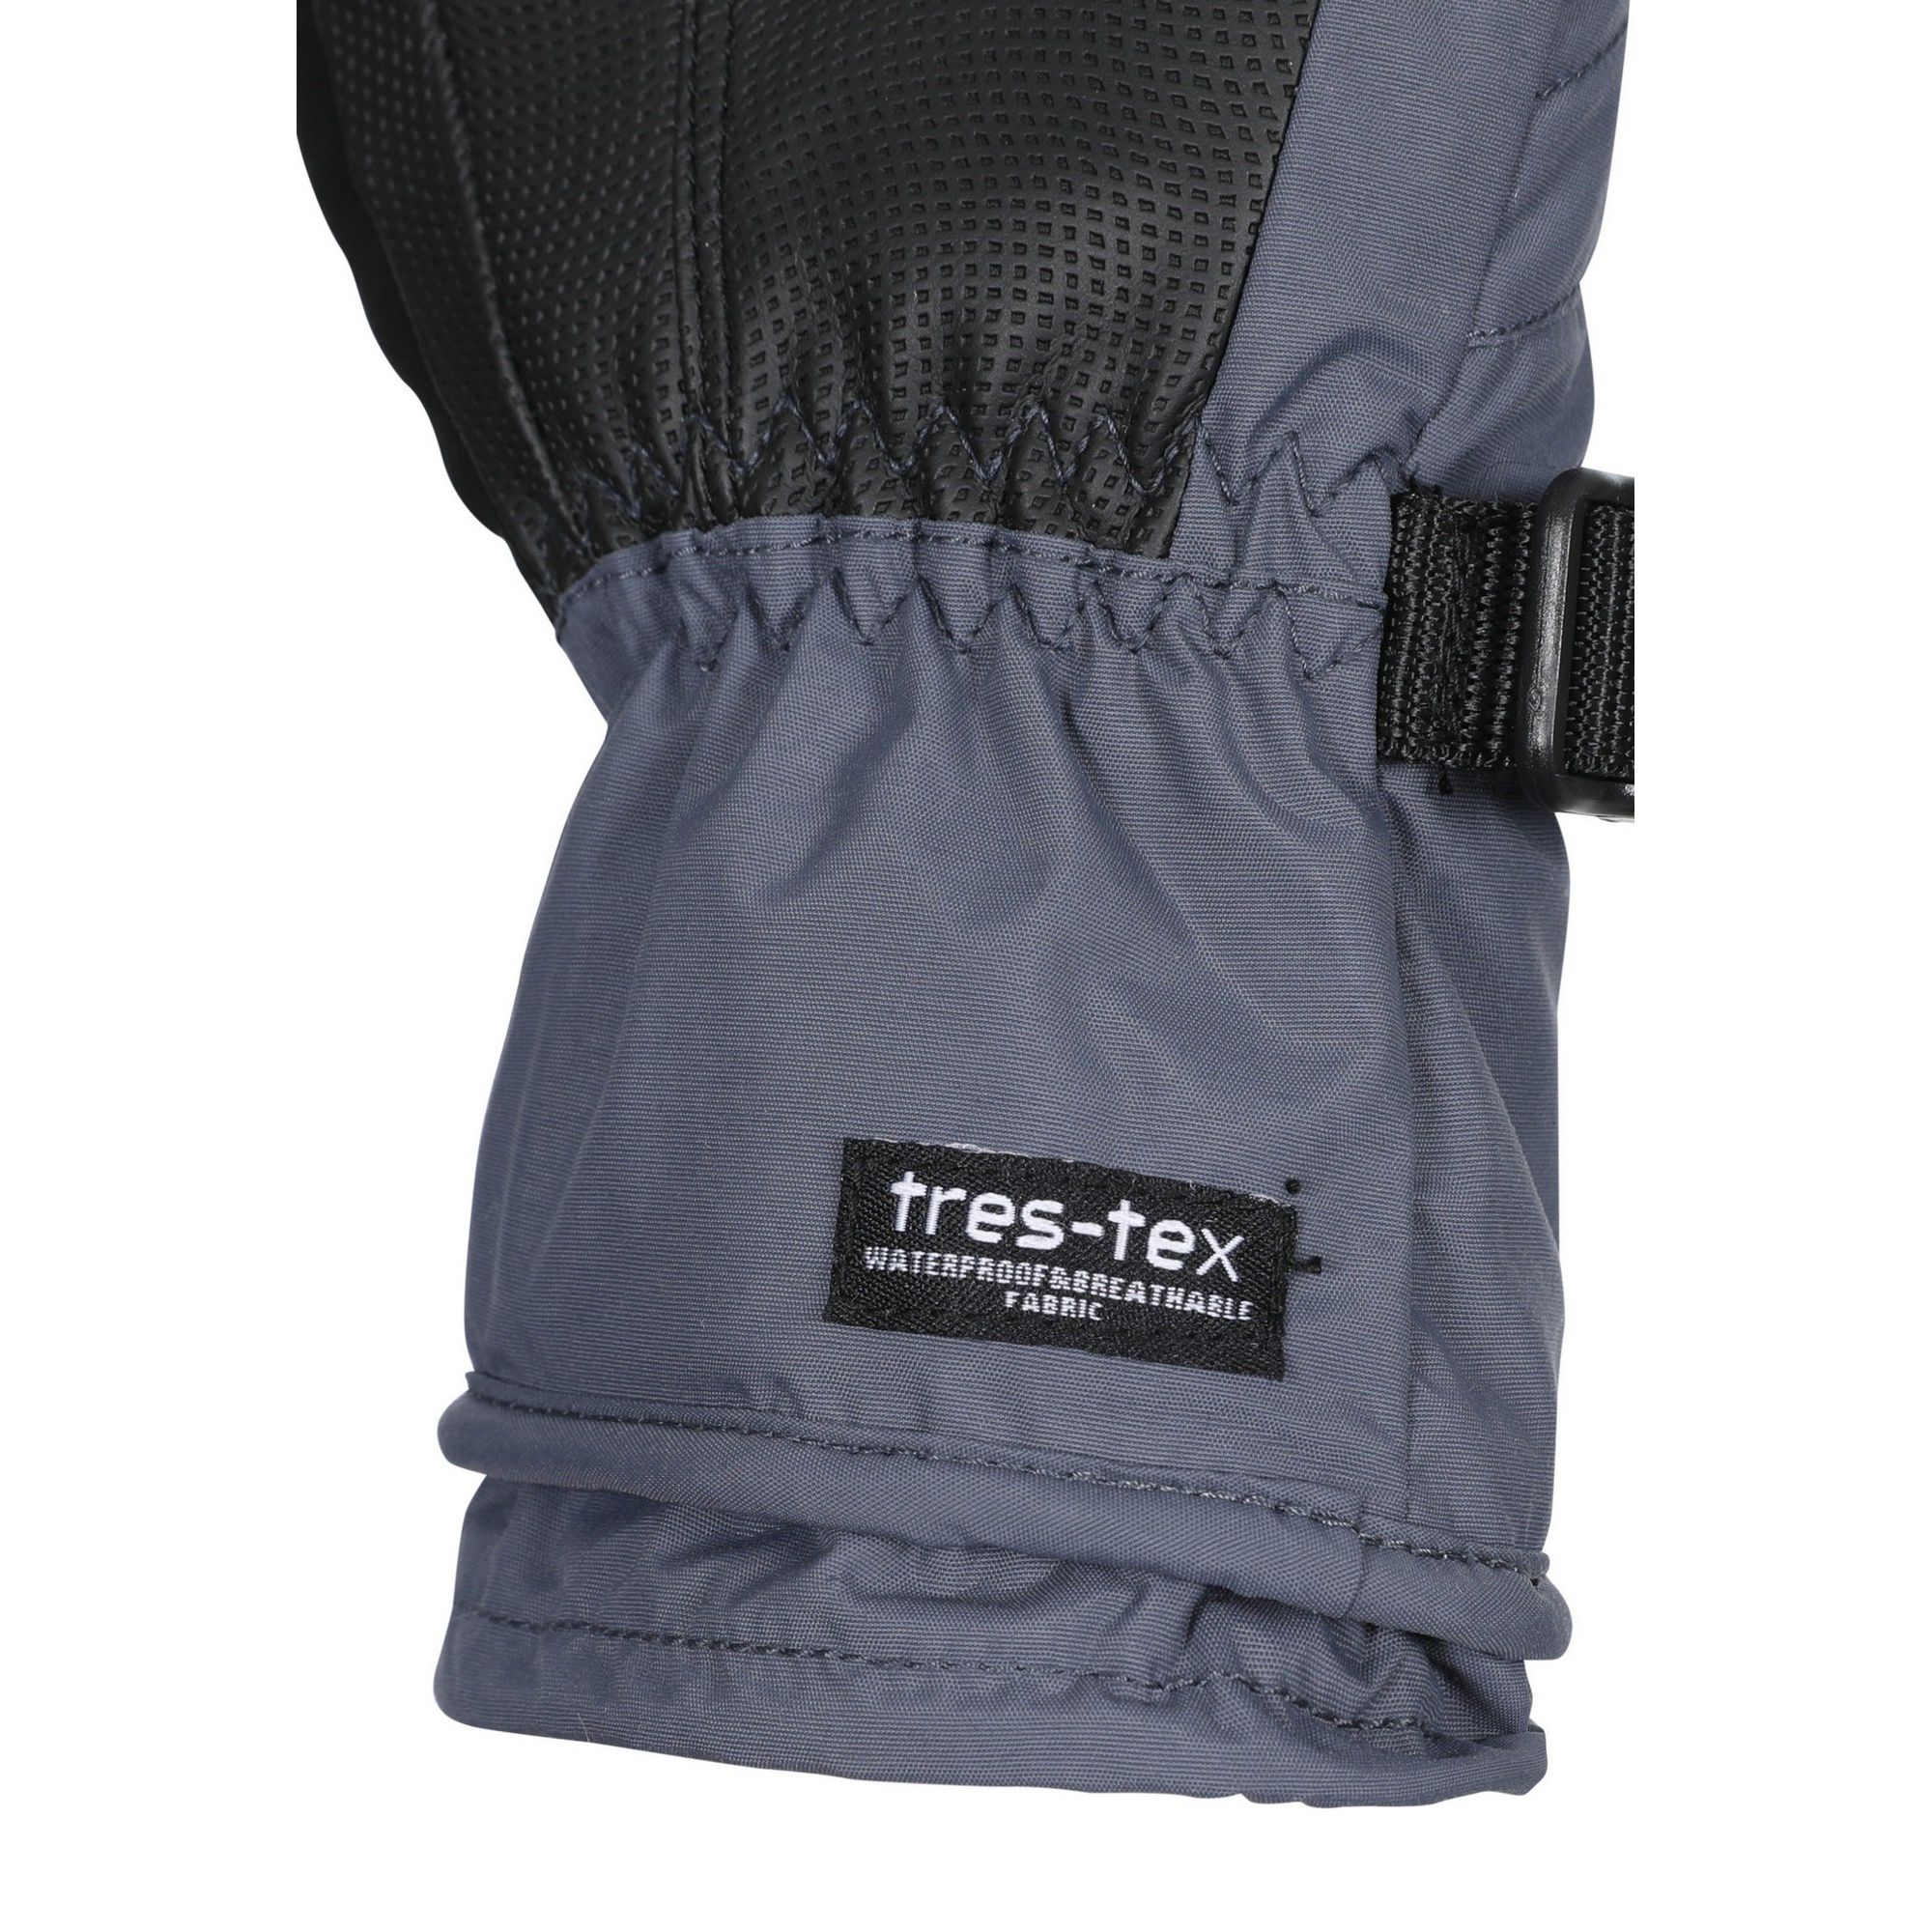 Performance gloves. Lightly padded. Drawcord. Gaiter wrist. Adjustable wrist strap. Waterproof. Breathable. Shell: 100% Polyamide, Insulation: 100% Polyester, Lining: 100% Polyester.